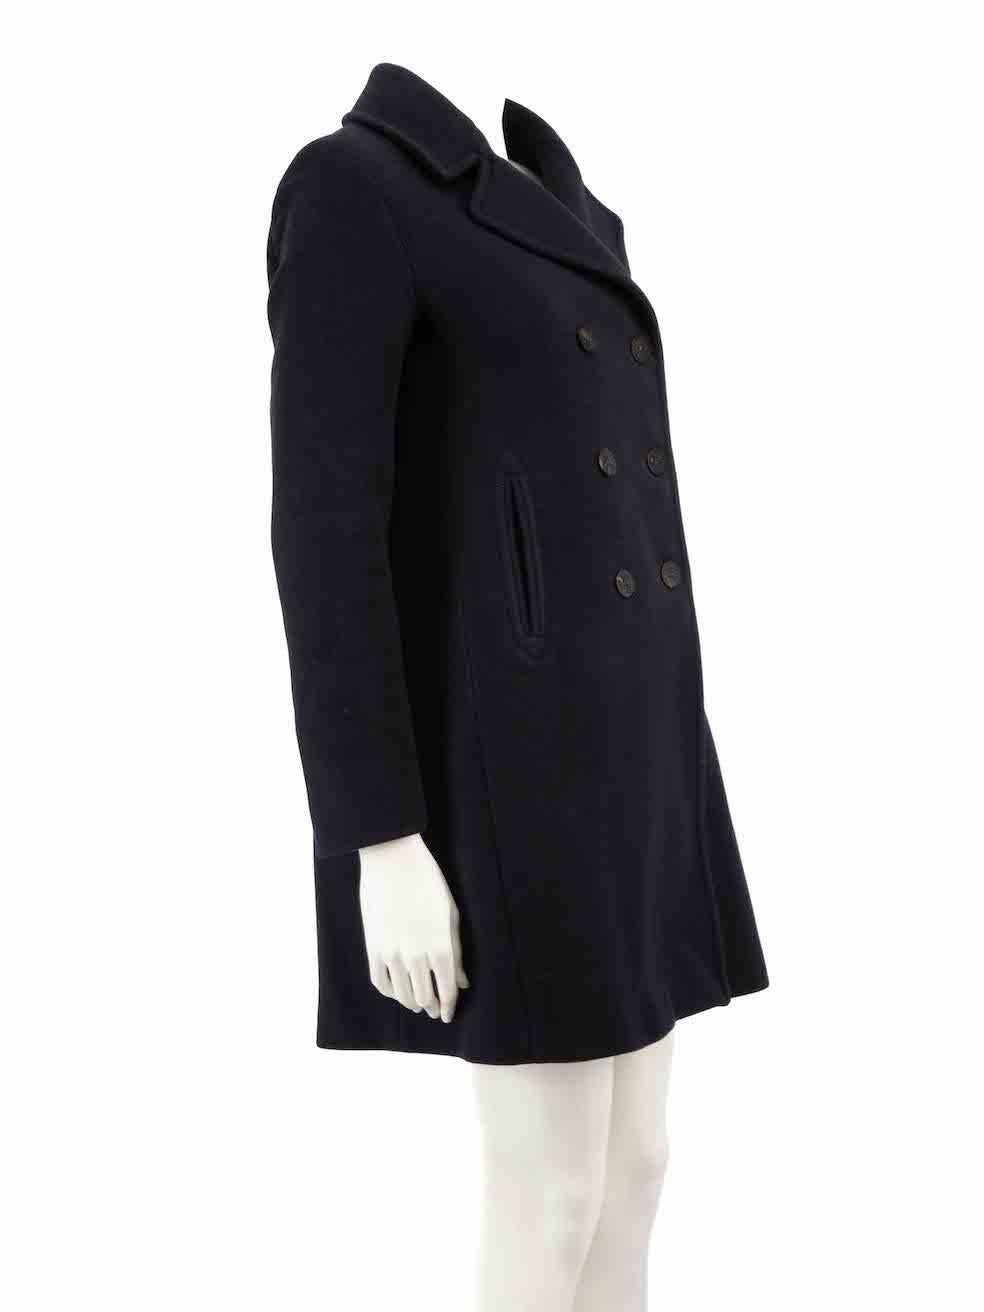 CONDITION is Very good. Hardly any visible wear to coat is evident on this used Weekend Max Mara designer resale item.
 
 
 
 Details
 
 
 Navy
 
 Wool
 
 Mid length coat
 
 Double breasted
 
 2x Front side pockets
 
 
 
 
 
 Composition
 
 UNCLEAR